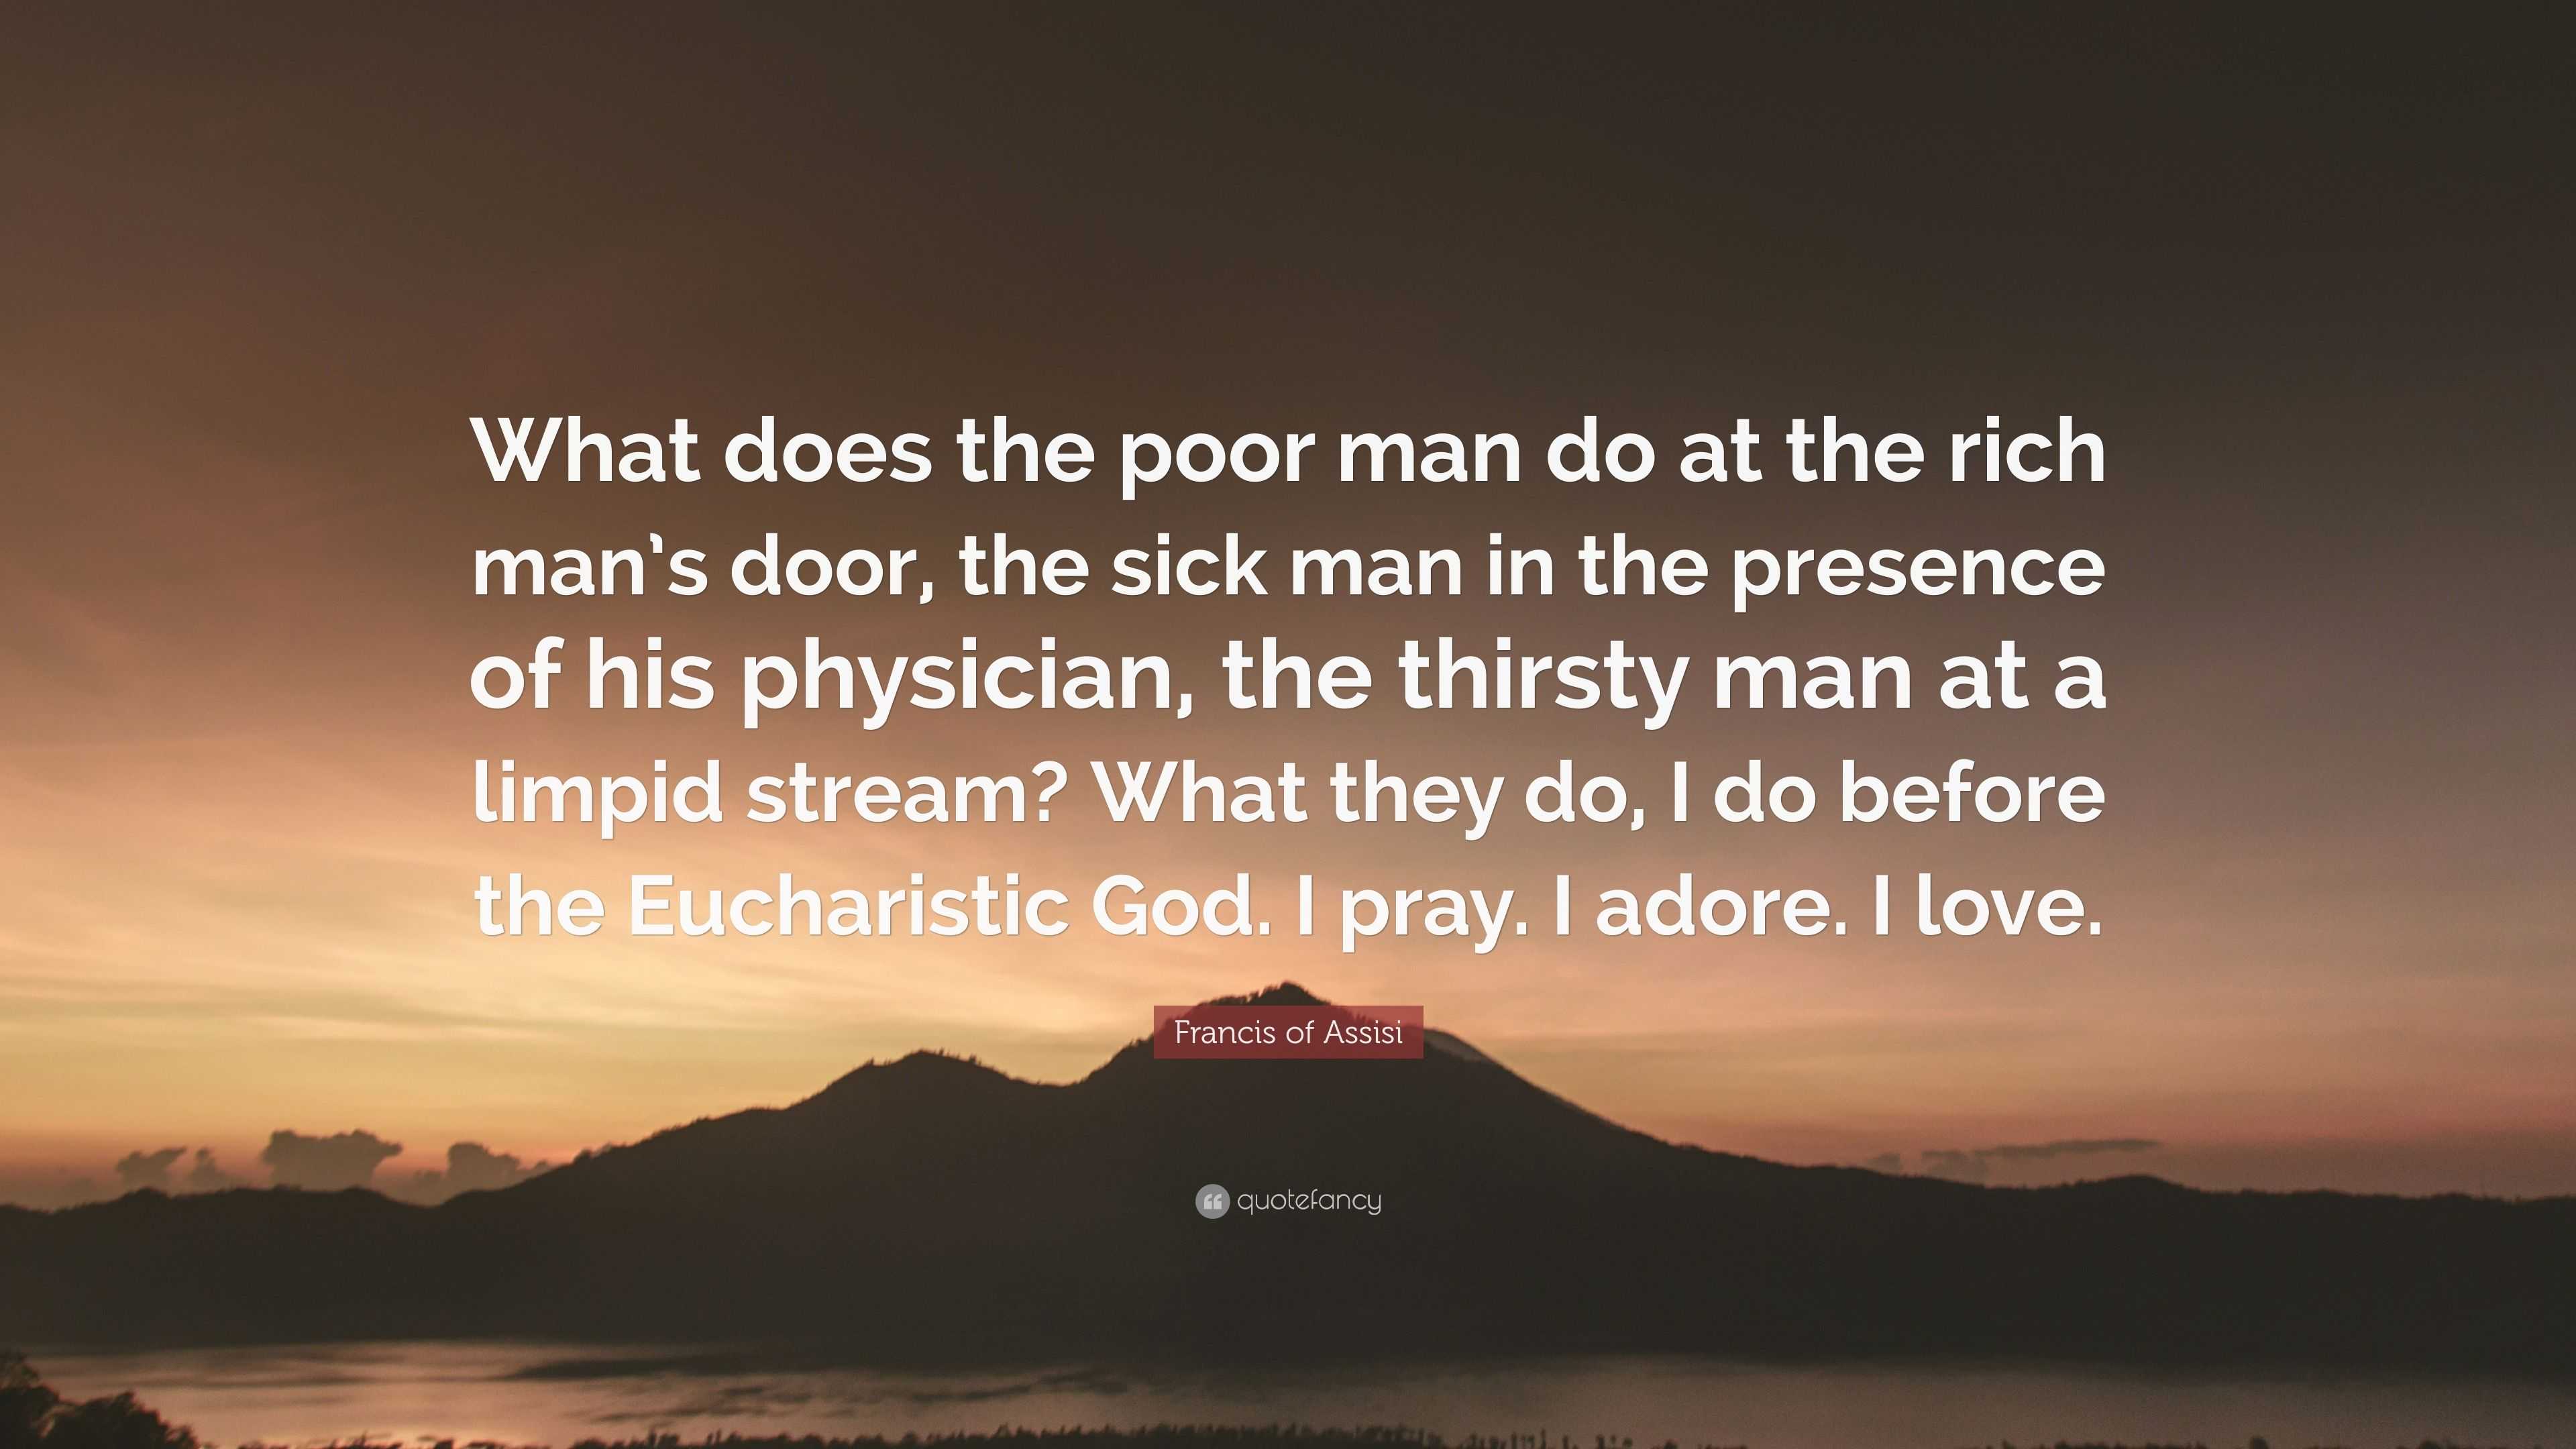 Francis of Assisi Quote “What does the poor man do at the rich man s